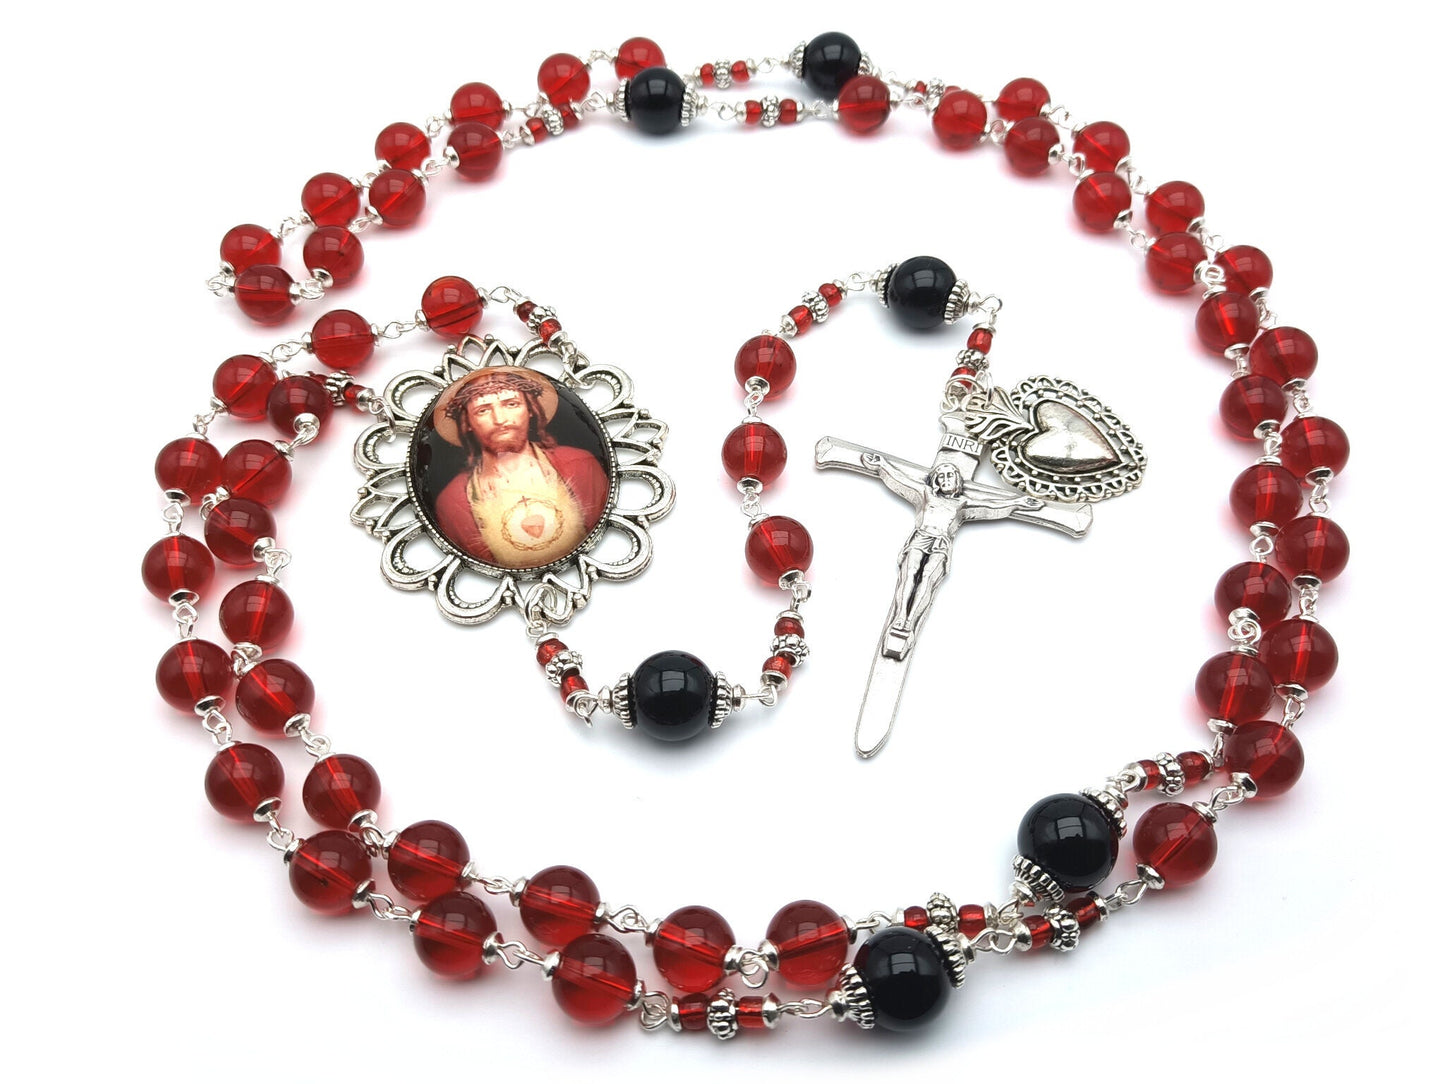 Sacred Heart of Jesus unique rosary beads with red glass beads, onyx pater beads, silver nail crucifix, heart medal and picture centre medal.